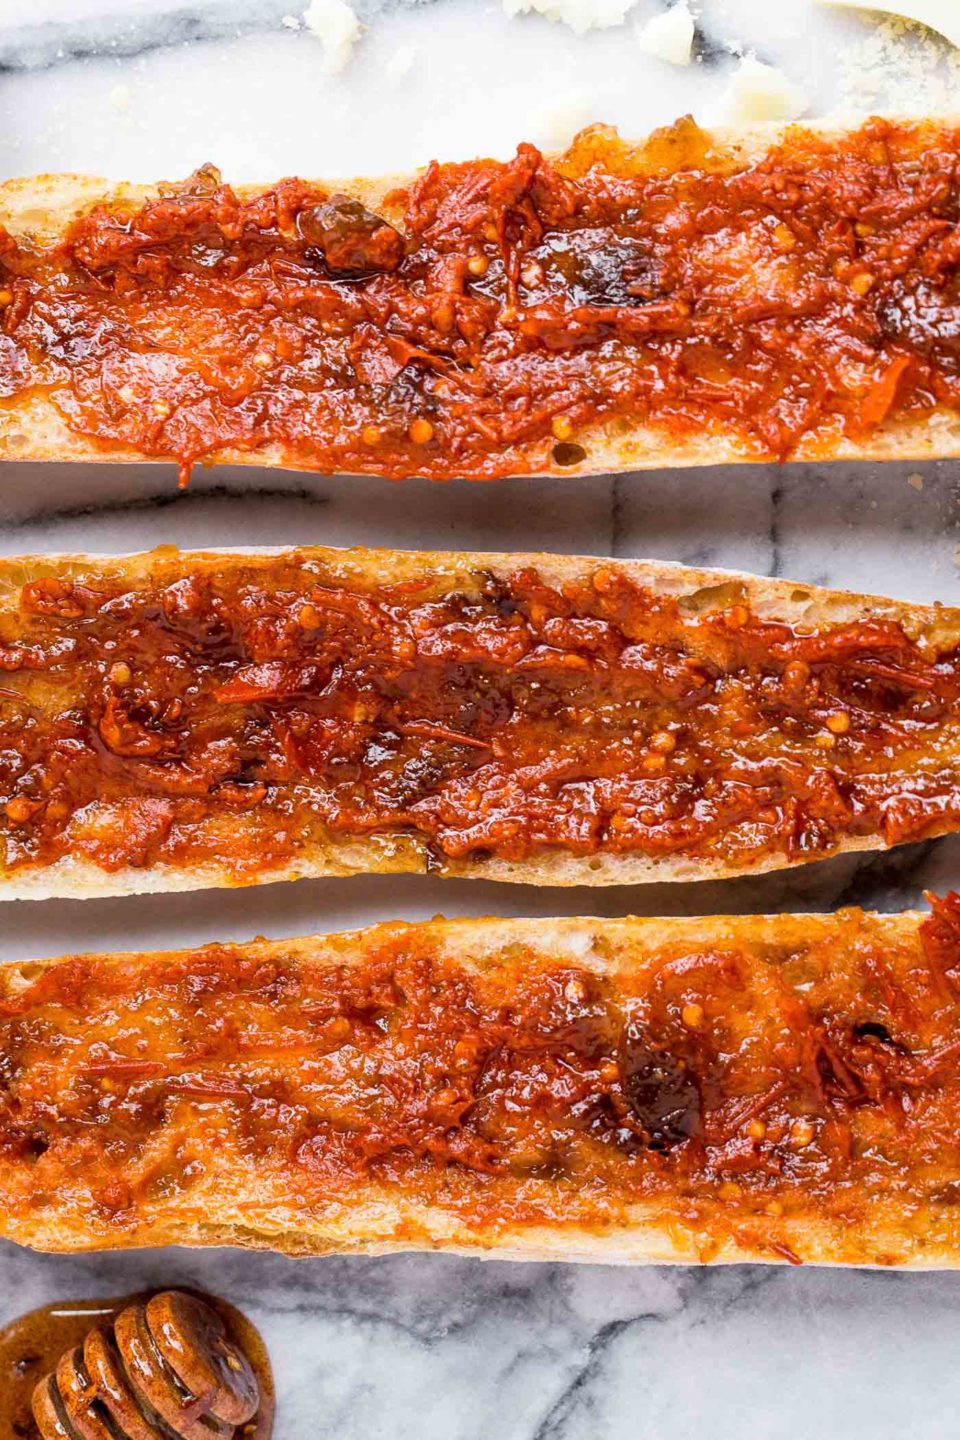 easy chorizo french breads with manchego, fig spread, & harissa, & covered in big fat drizzles of homemade spicy paprika honey. an easy & elegant appetizer! an easy & elegant appetizer or snack, perfect for holiday entertaining! #playswellwithbutter #chorizo #harissa #manchego #holidayparty #cocktailparty #appetizer